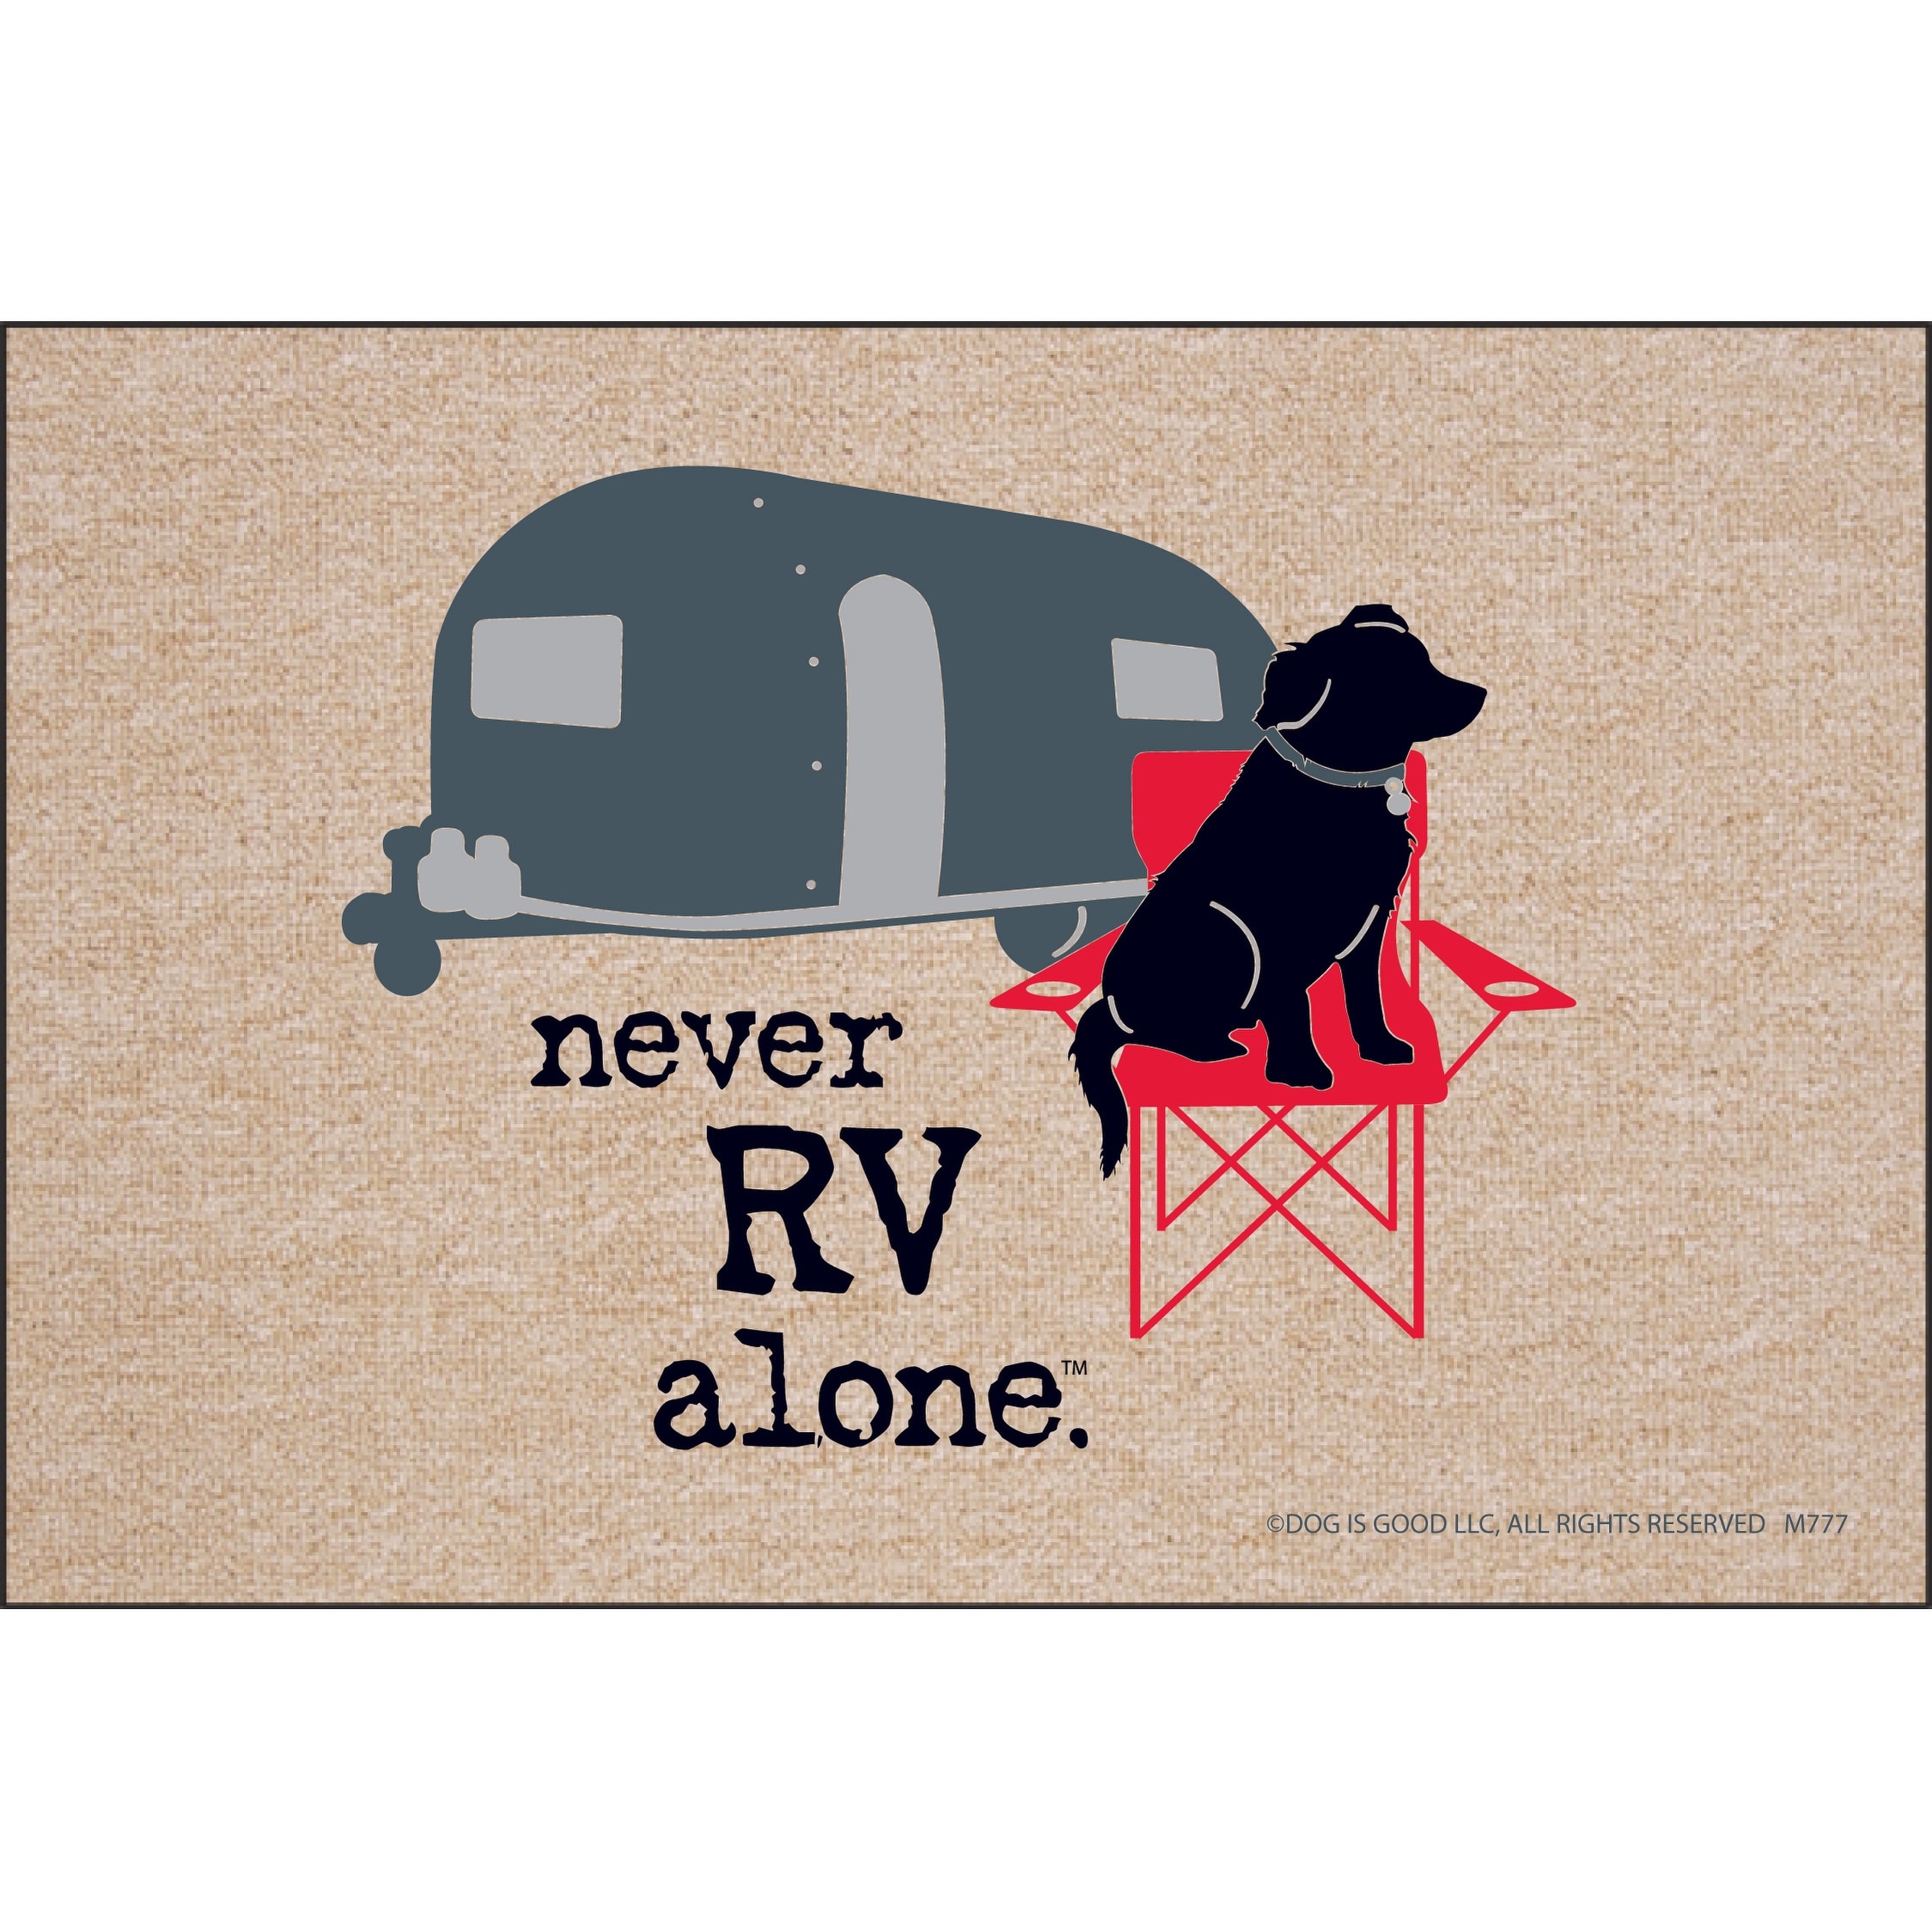 https://ak1.ostkcdn.com/images/products/is/images/direct/49f7416d89333467a9dfbd2e67816ff1167d5562/High-Cotton-Welcome-Doormats---Never-Rv-Alone-Dog.jpg